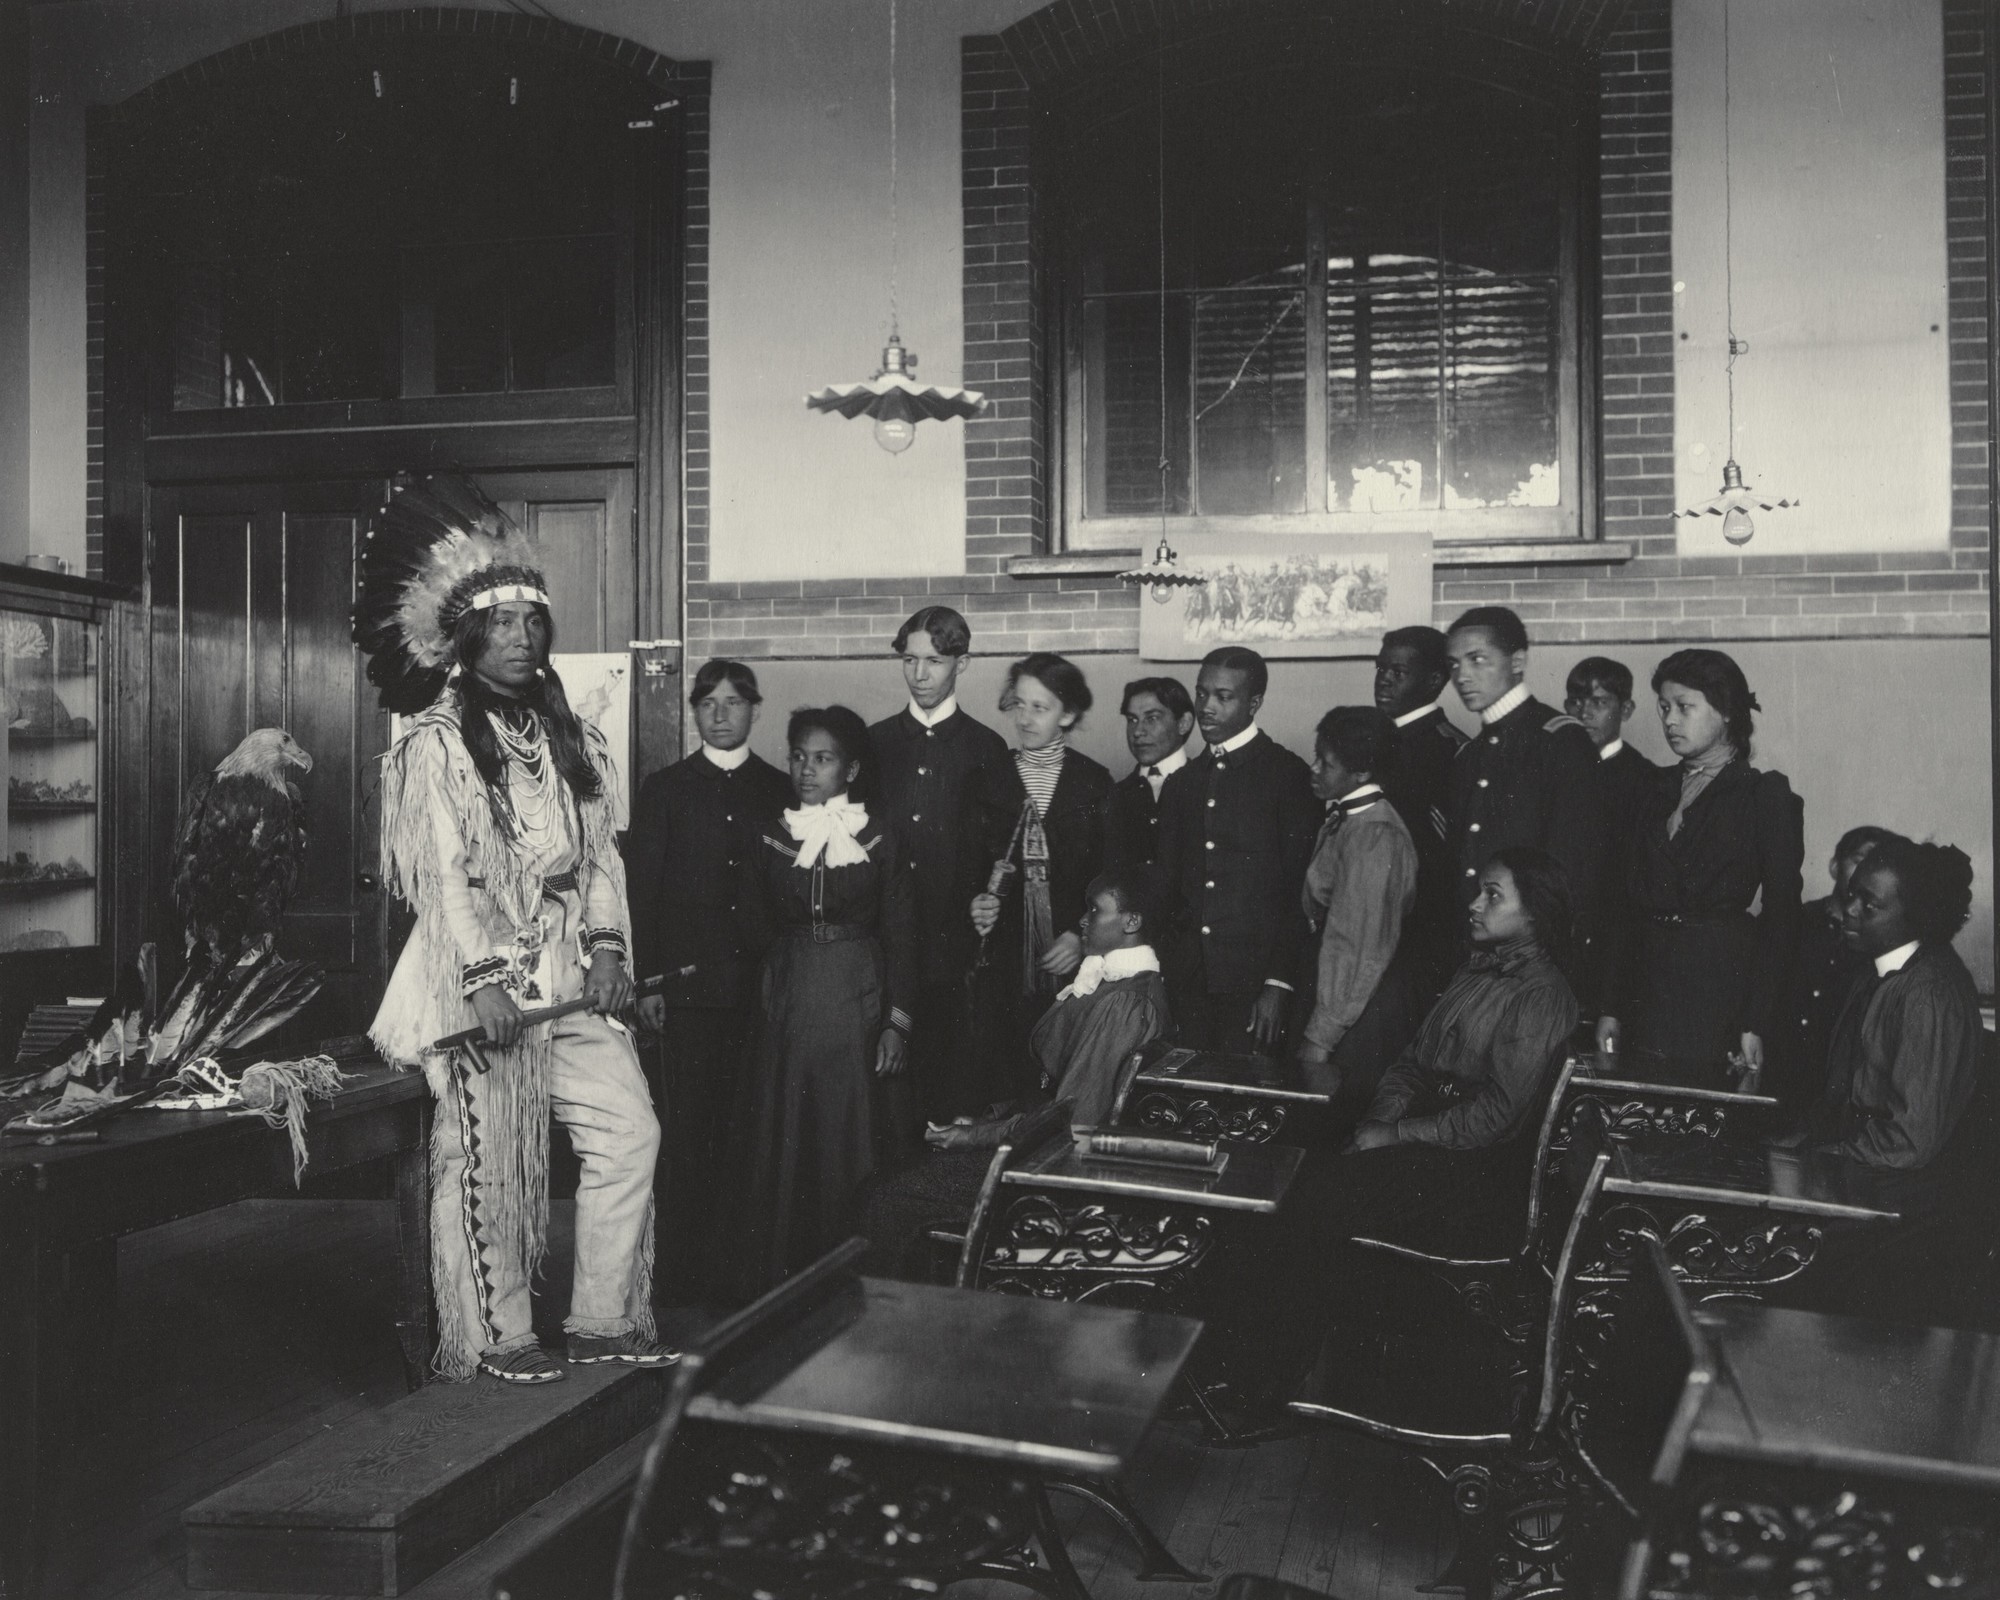 A black and white photograph of a group of students standing at the back of a classroom with desks arranged in front of them. They look at a man dressed in costume of a Native American. He is standing next to a taxidermied bald eagle.